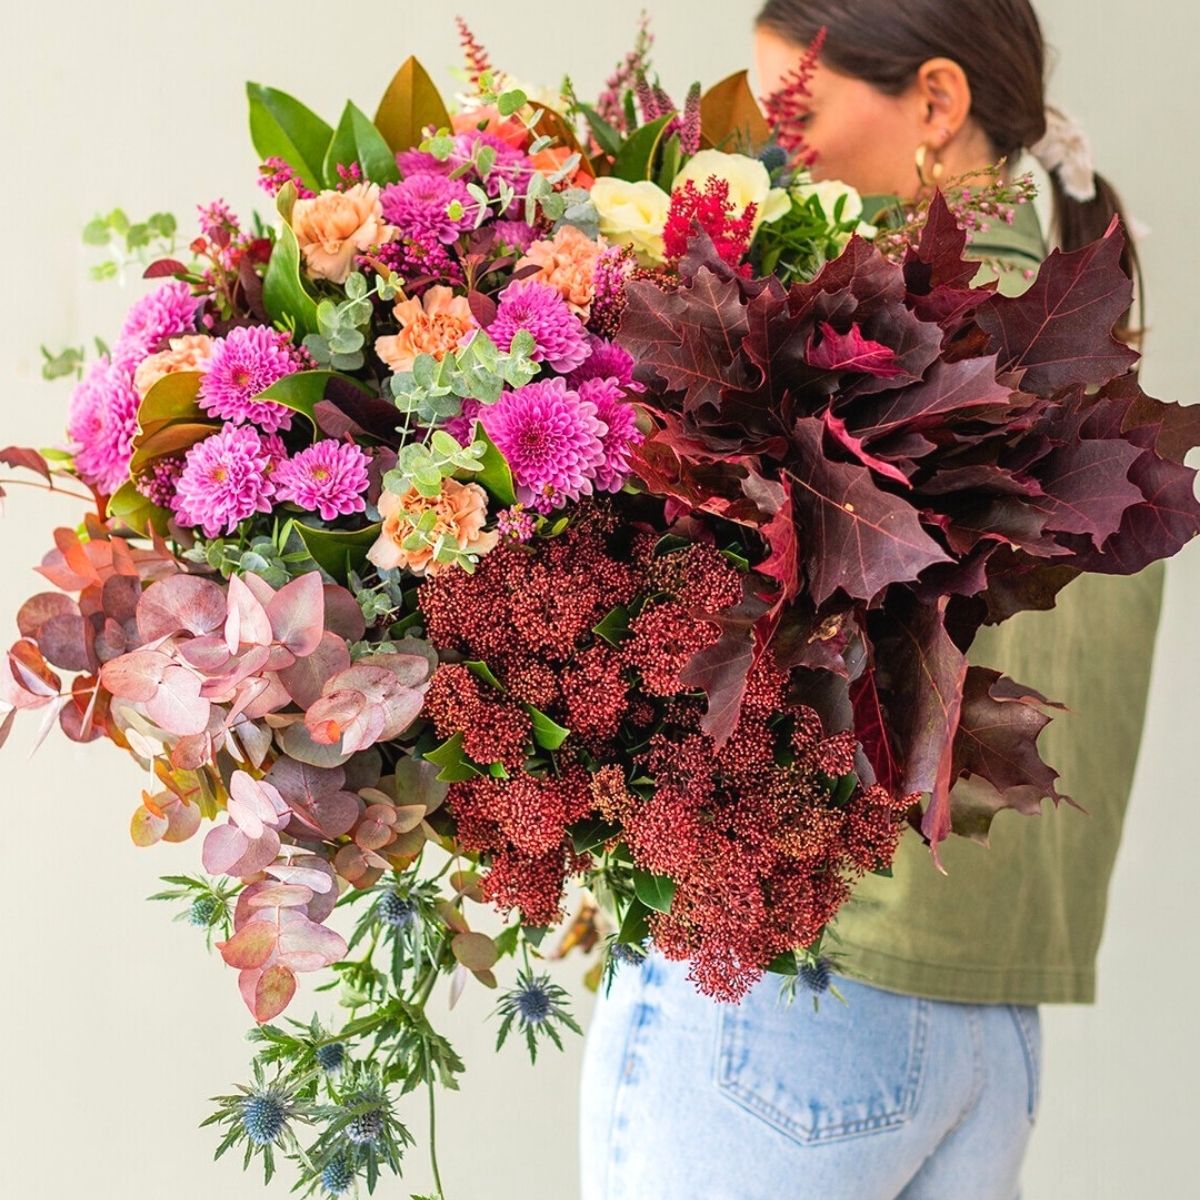 Fall floral design by Colvin team